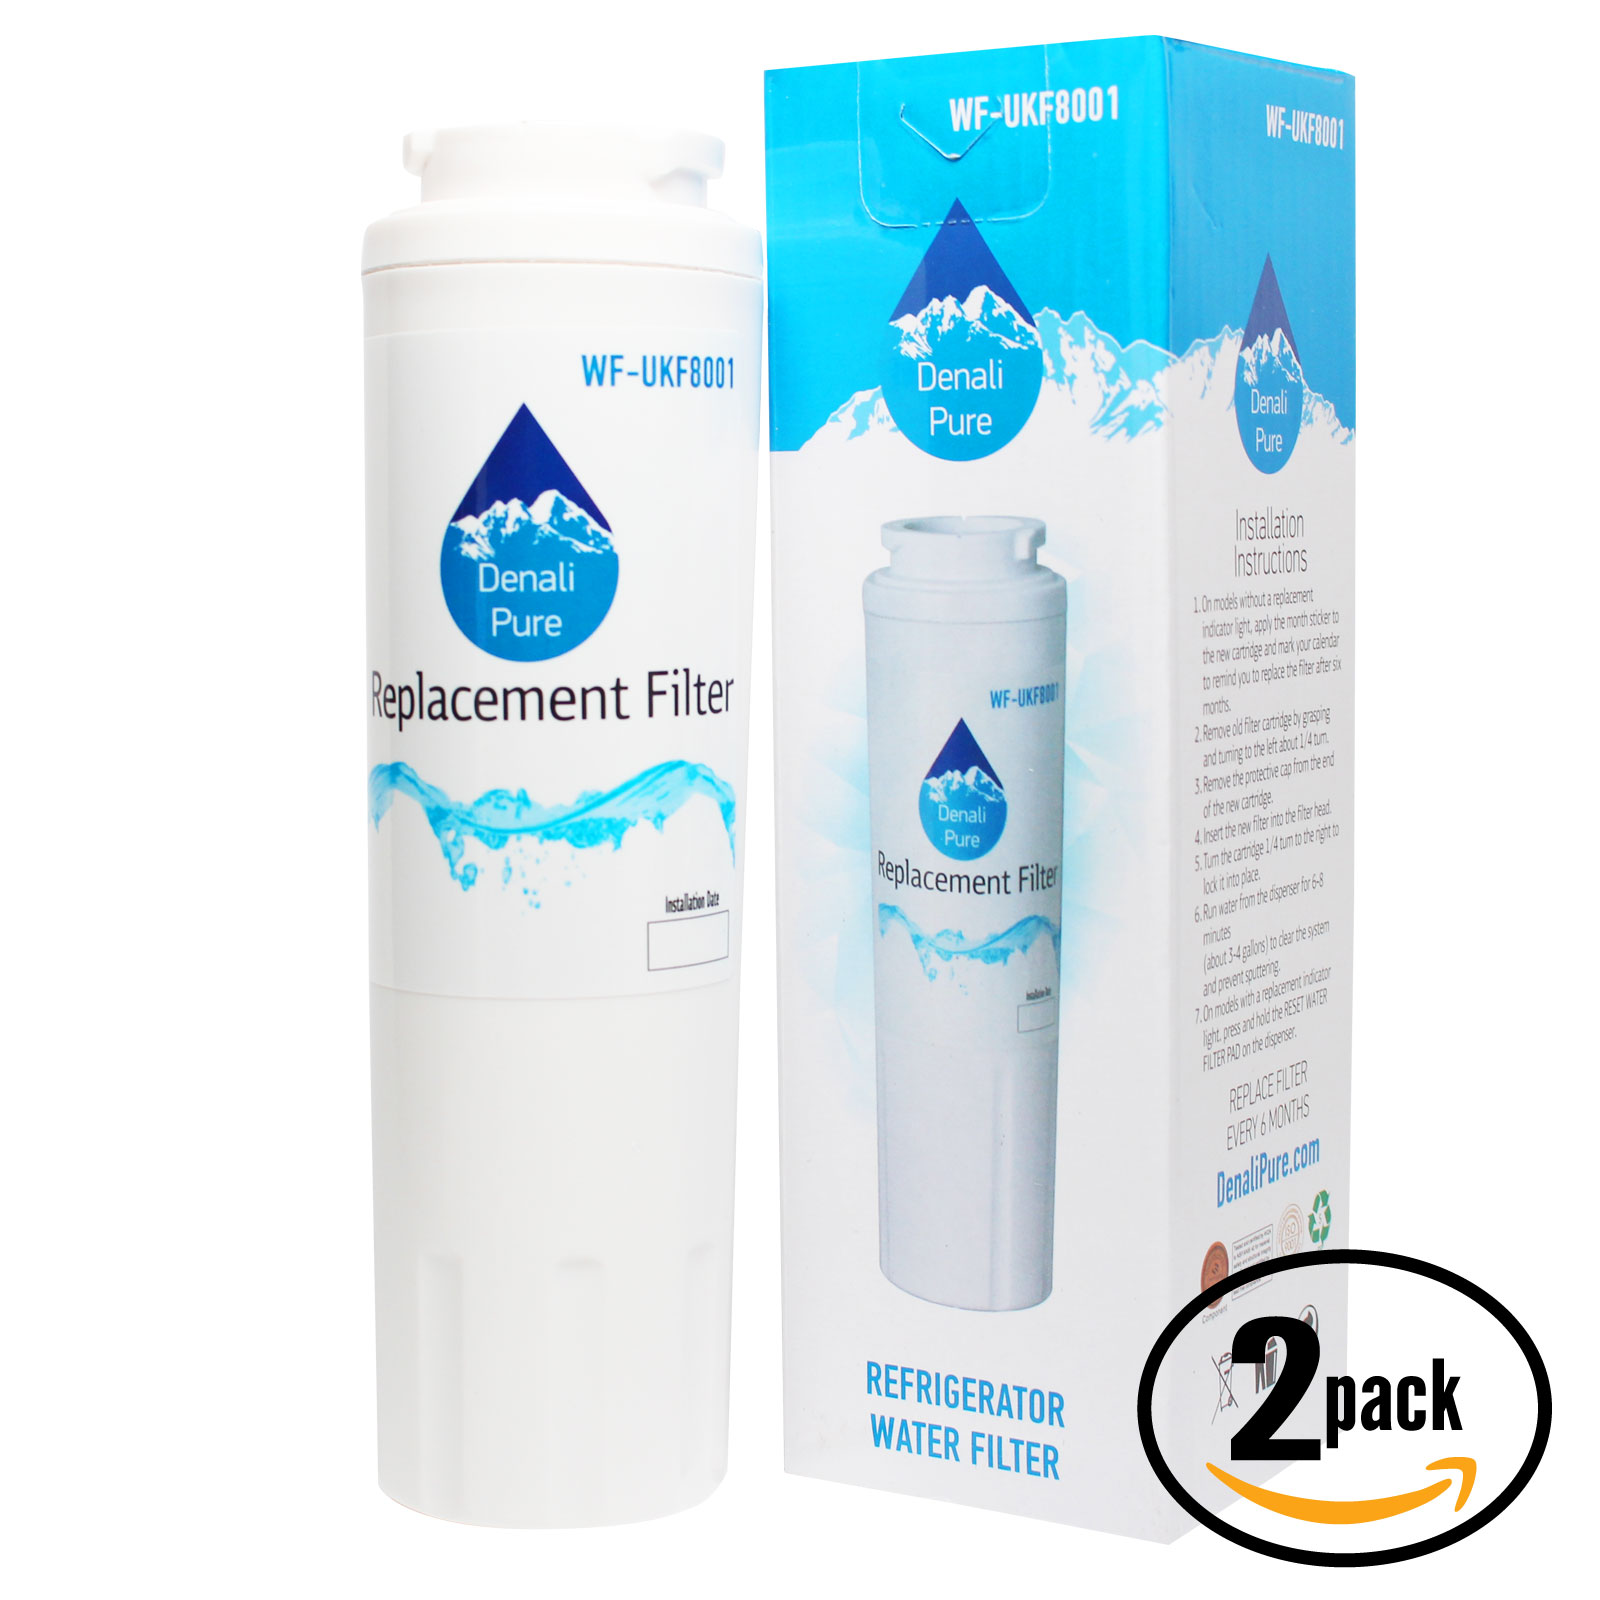 2-Pack Compatible with Whirlpool GI0FSAXVB03 Refrigerator Water Filter - Compatible with Whirlpool 4396395 Fridge Water Filter Cartridge - image 1 of 4